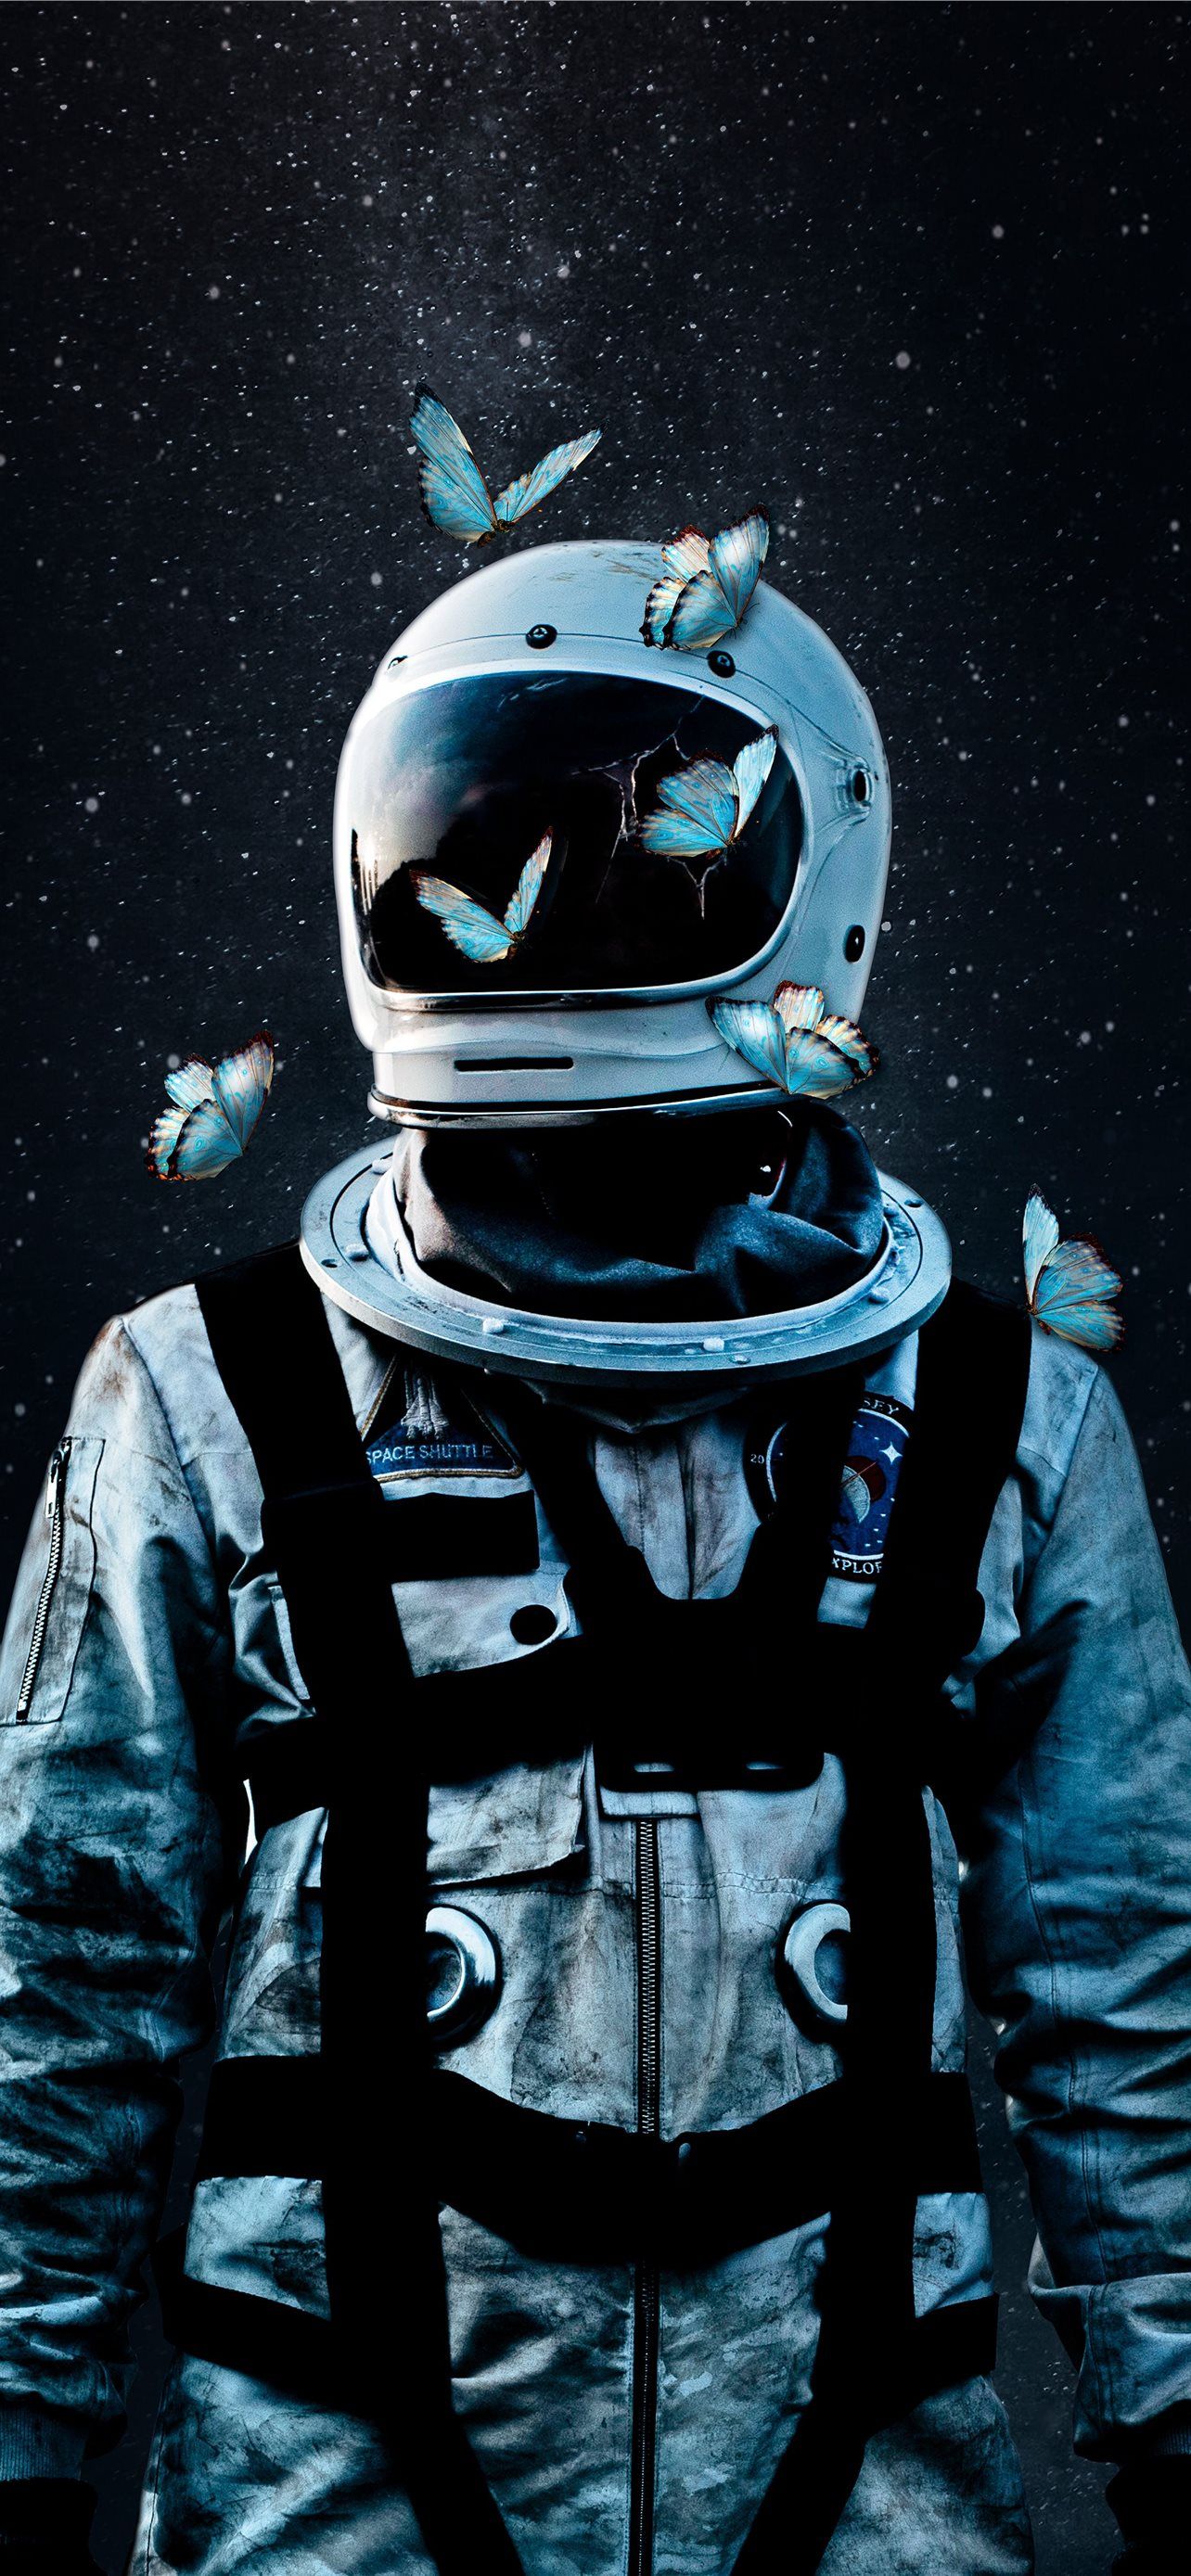 A man in an astronaut suit with butterflies on his head - Astronaut